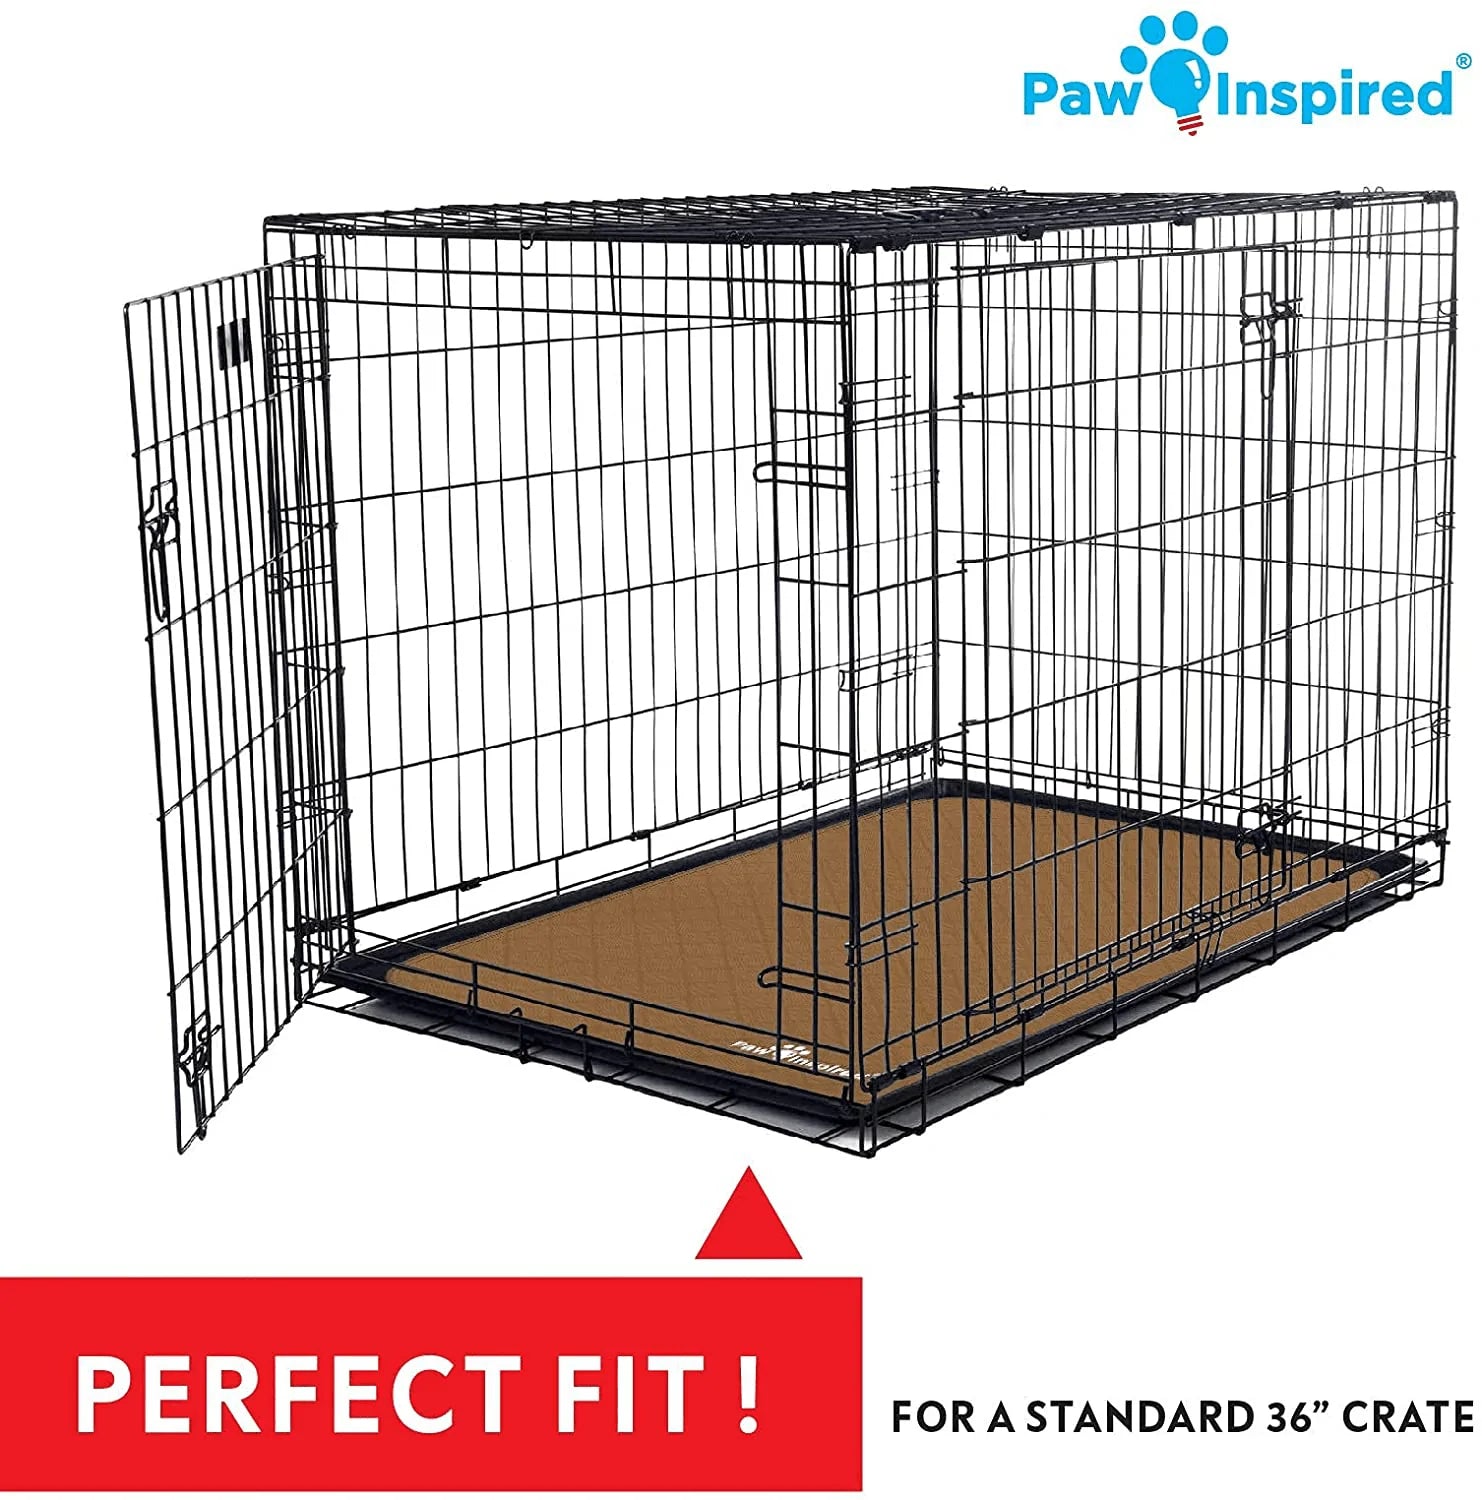 Large Dog Cage Pad, Washable And Reusable Puppy Training Pad